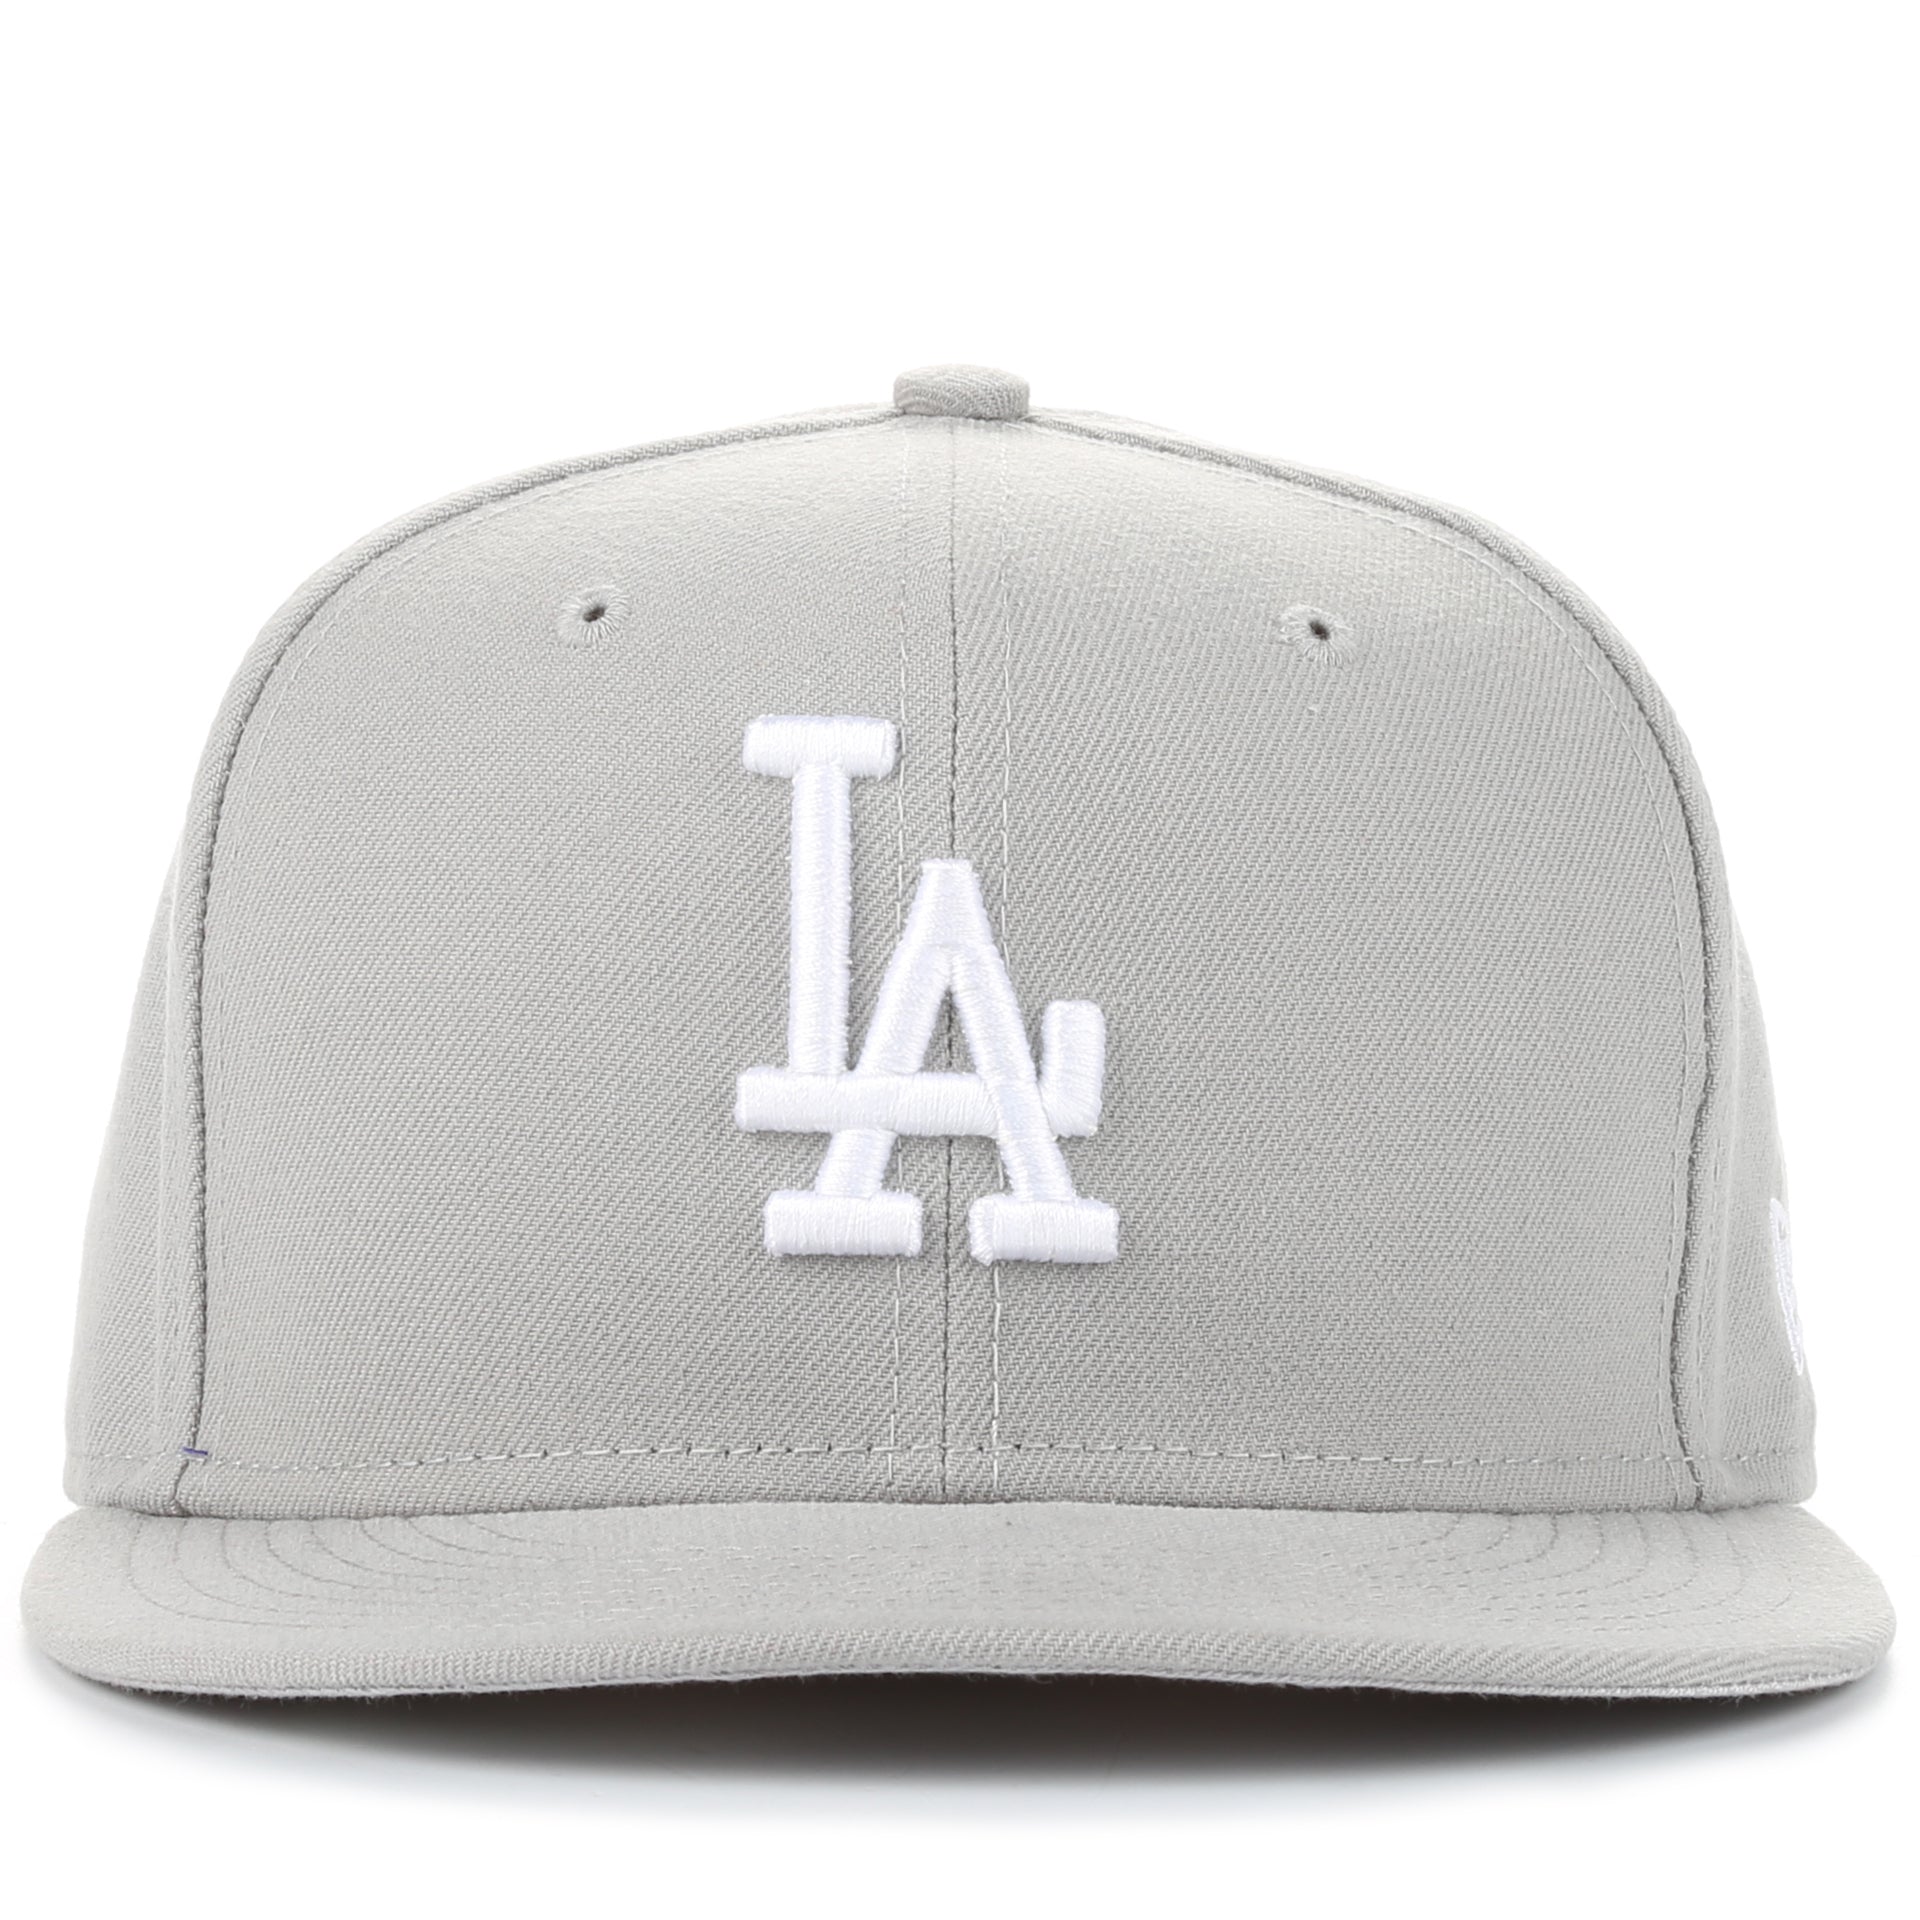 New Era 59Fifty MLB Basic Fitted Cap - Los Angeles Dodgers/Grey